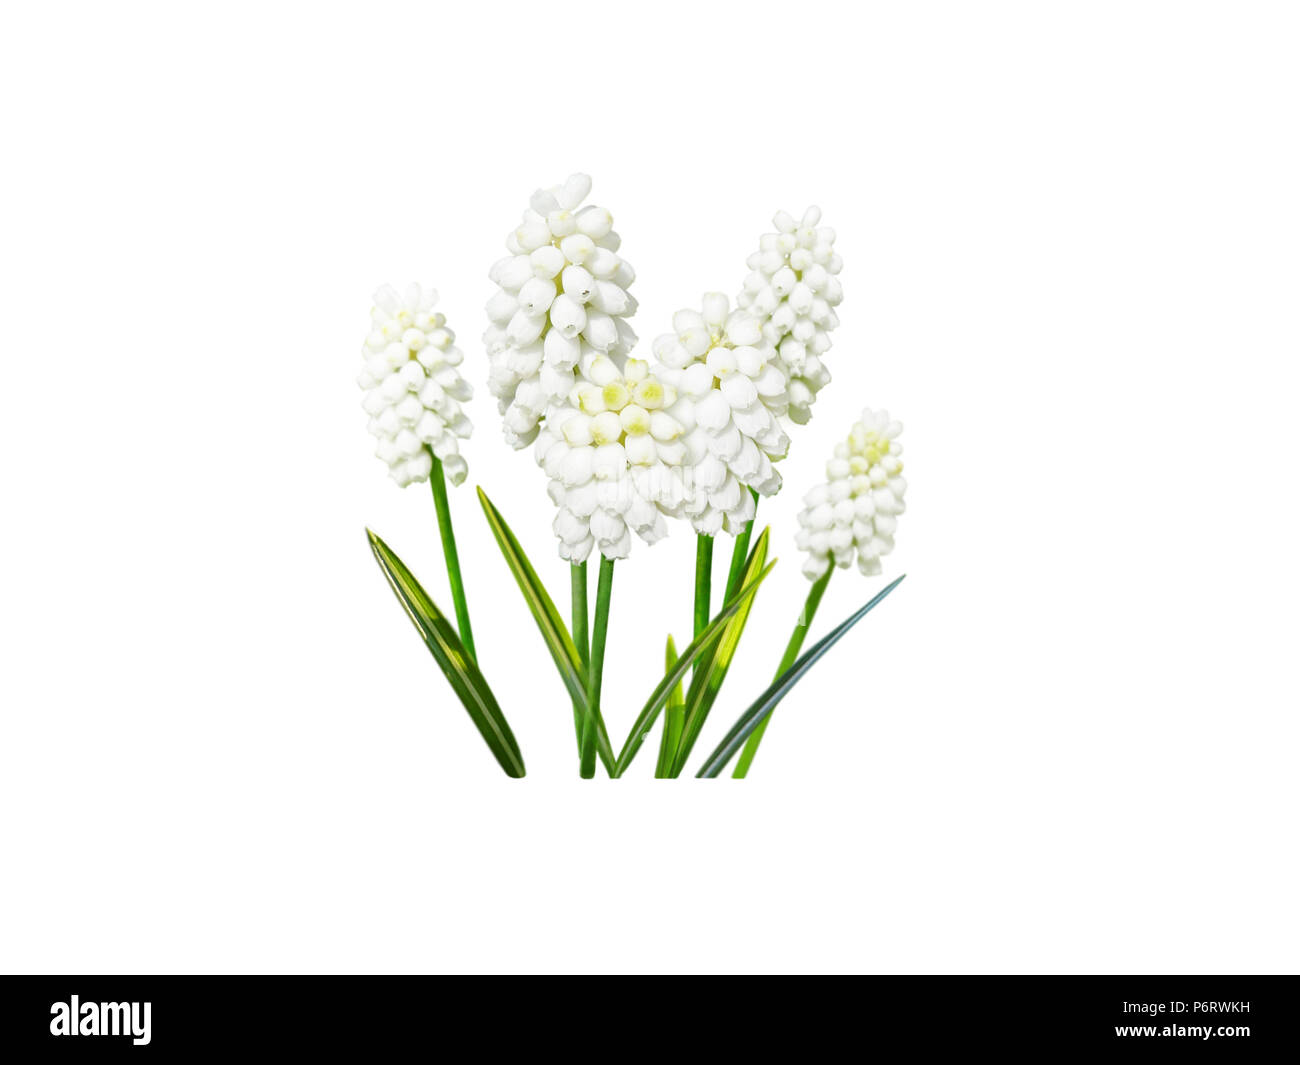 Muscari or grape hyacinth white flowers isolated on white Stock Photo